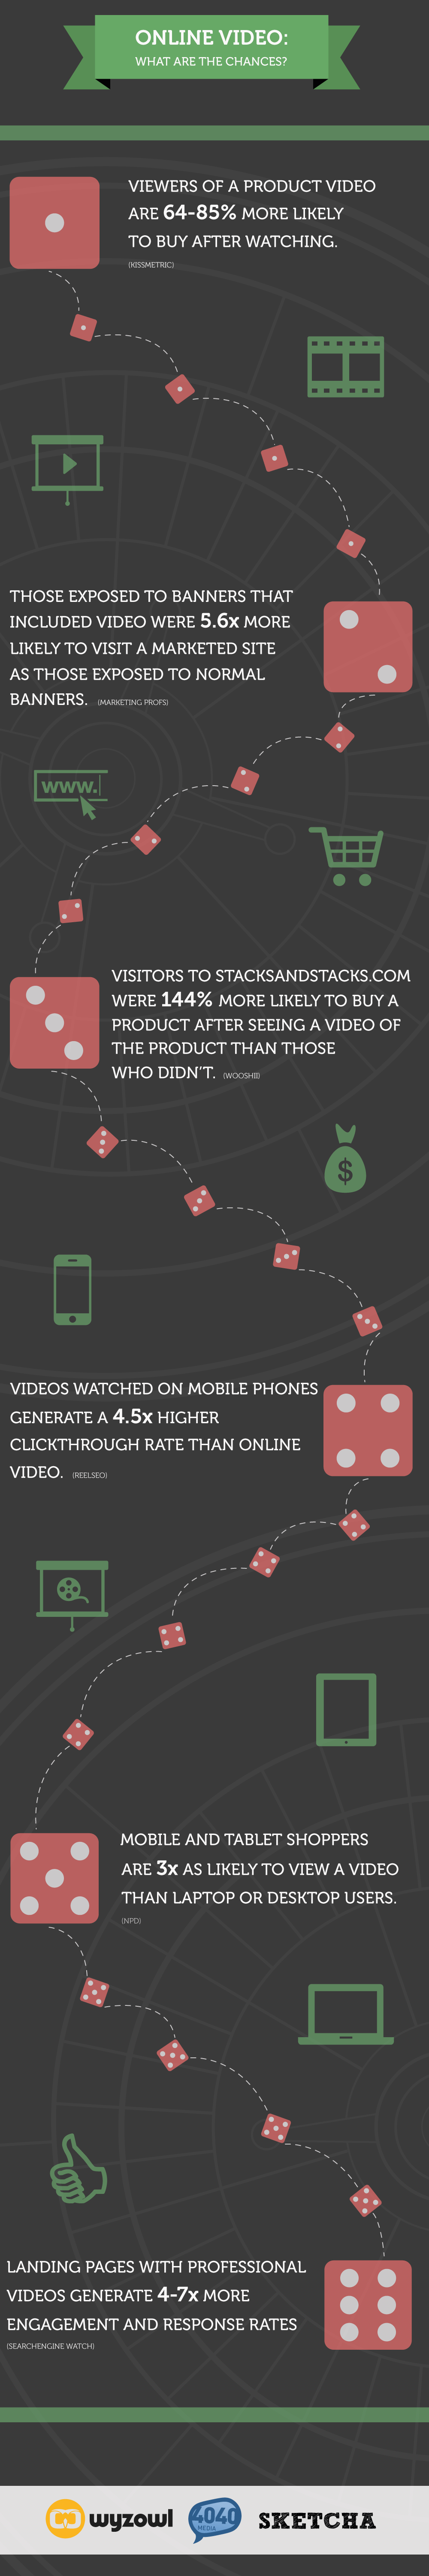 Online Video Drives Sales-Infographic